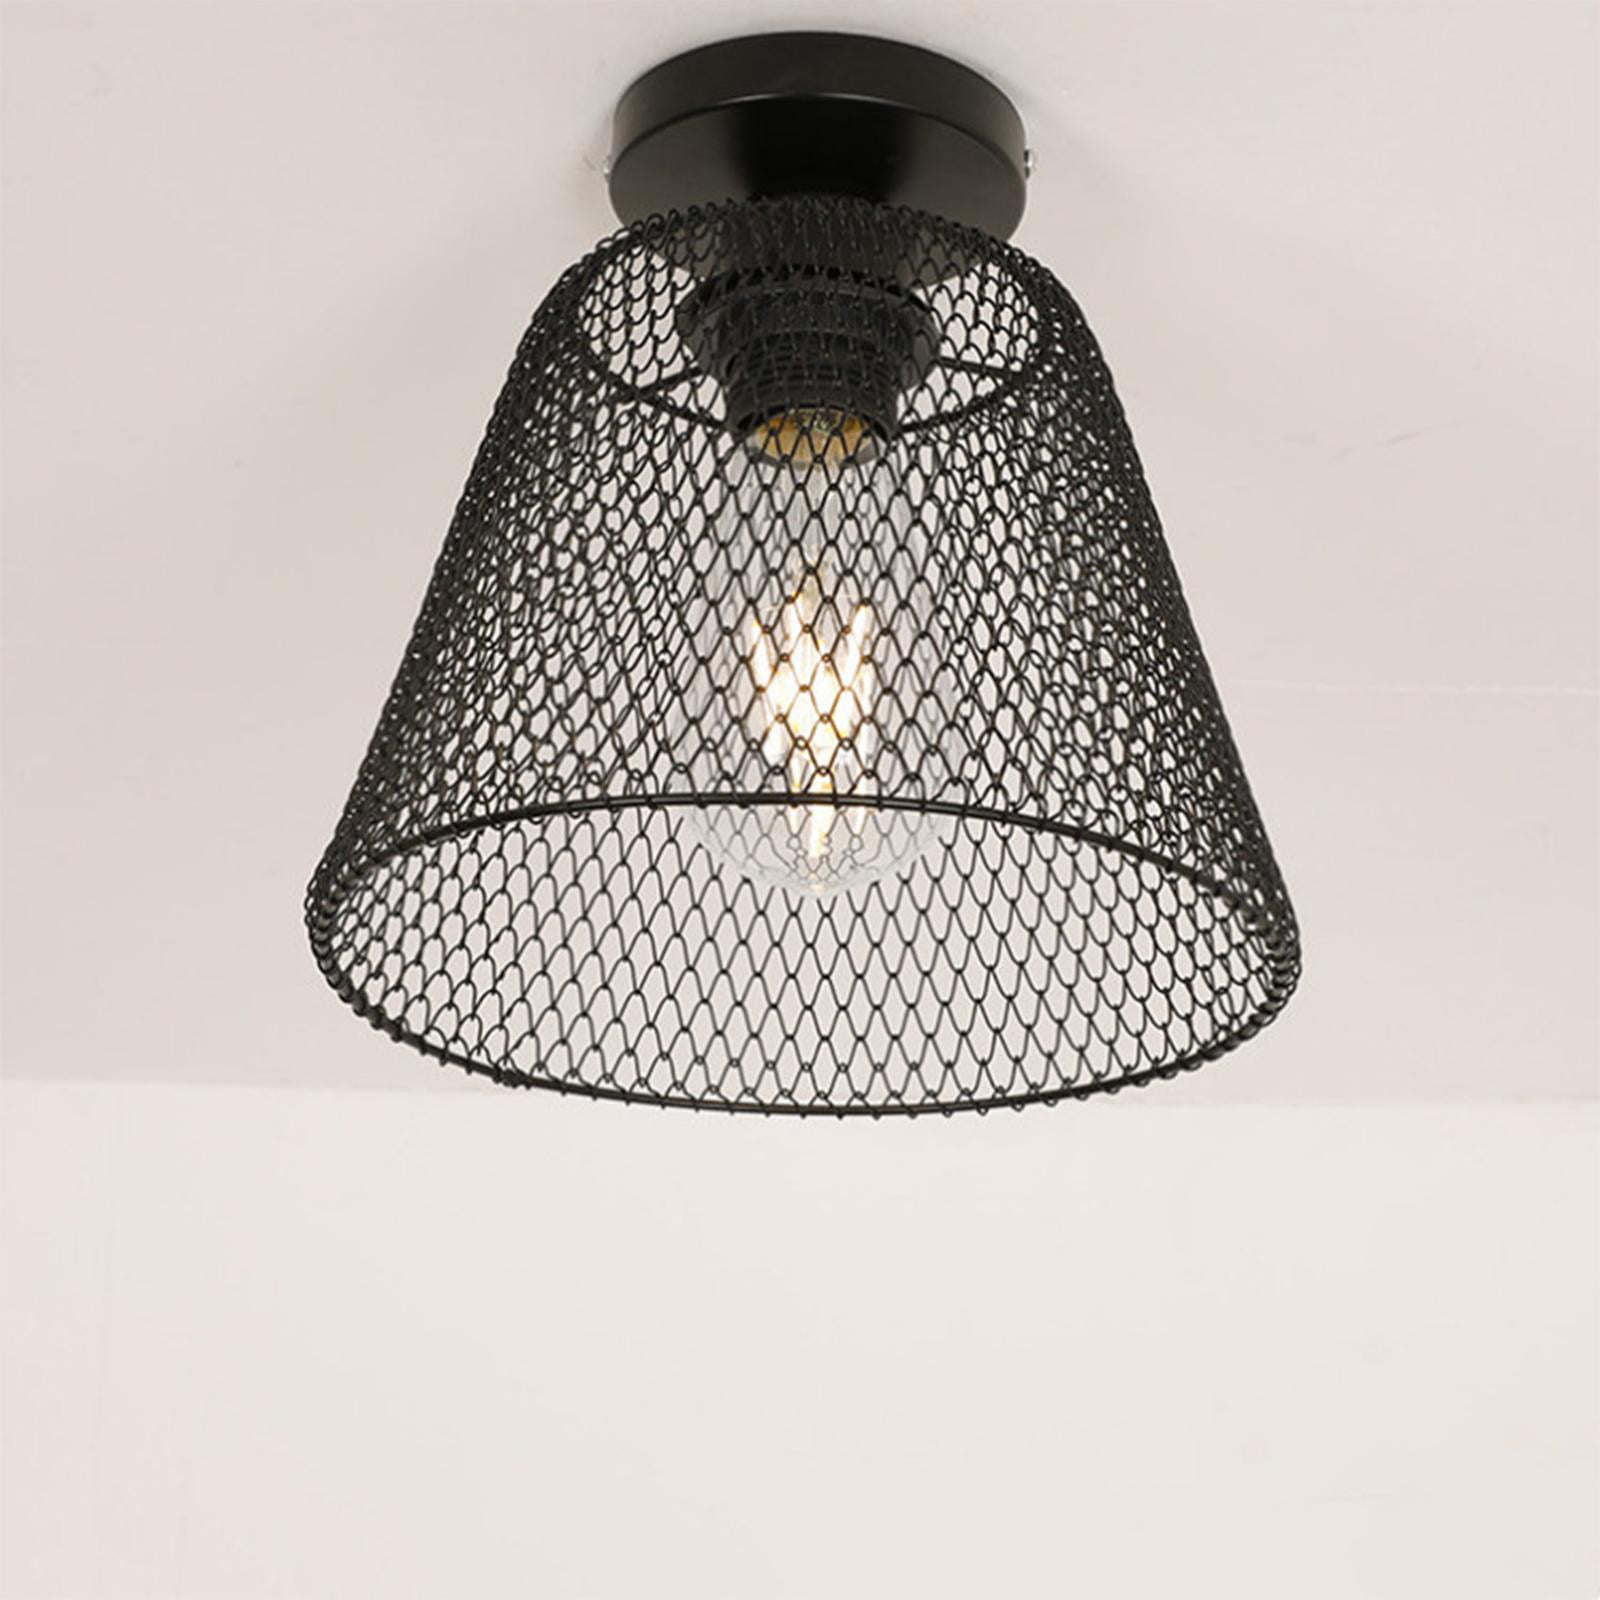 Net Bottom Vintage Pendant Light Iron Wire Cage Ceiling Lampshade Fixtur 